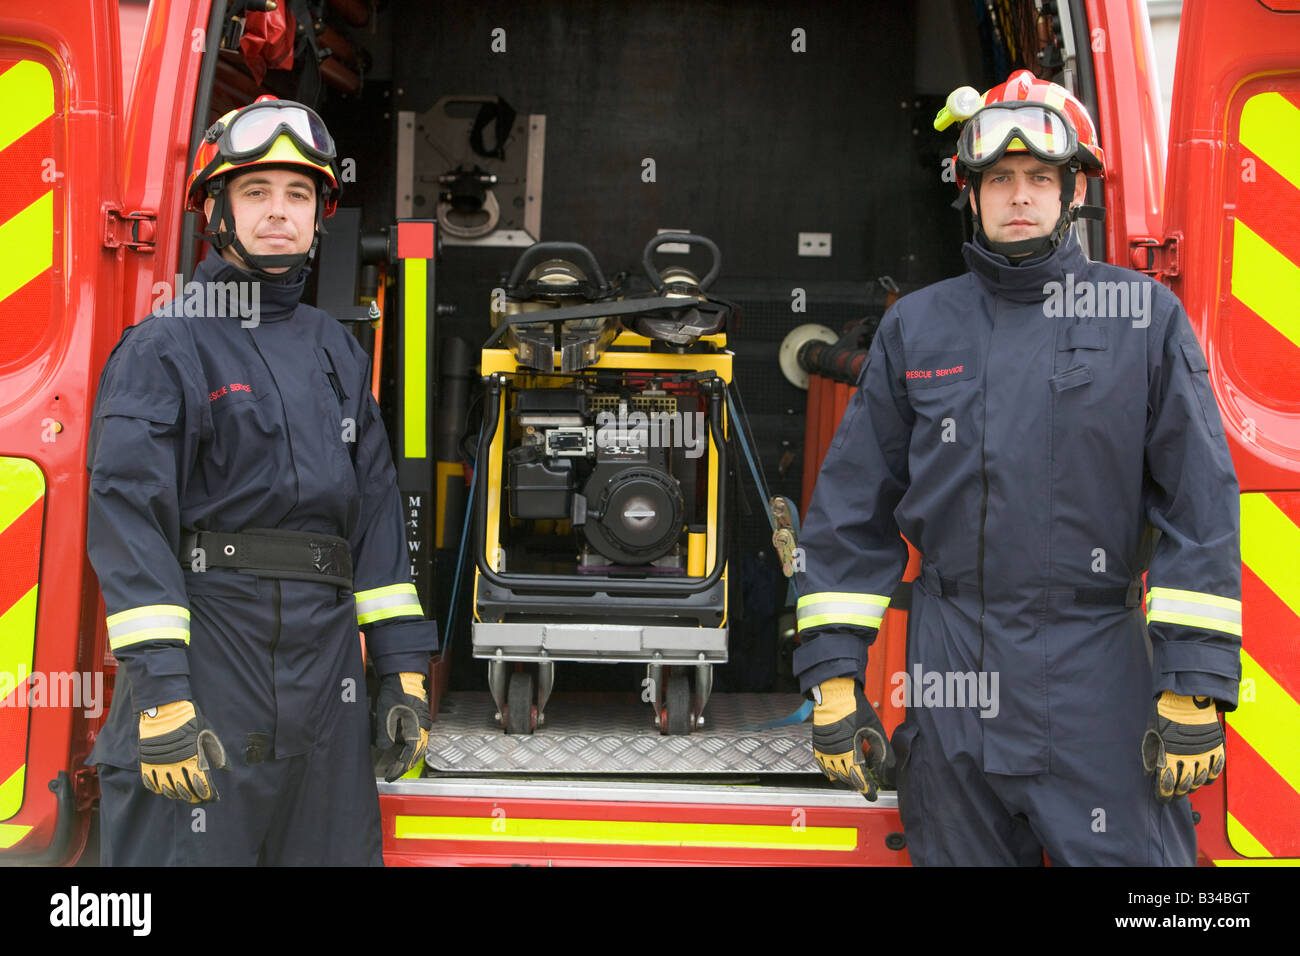 Two rescue workers standing by open back door of rescue vehicle Stock Photo